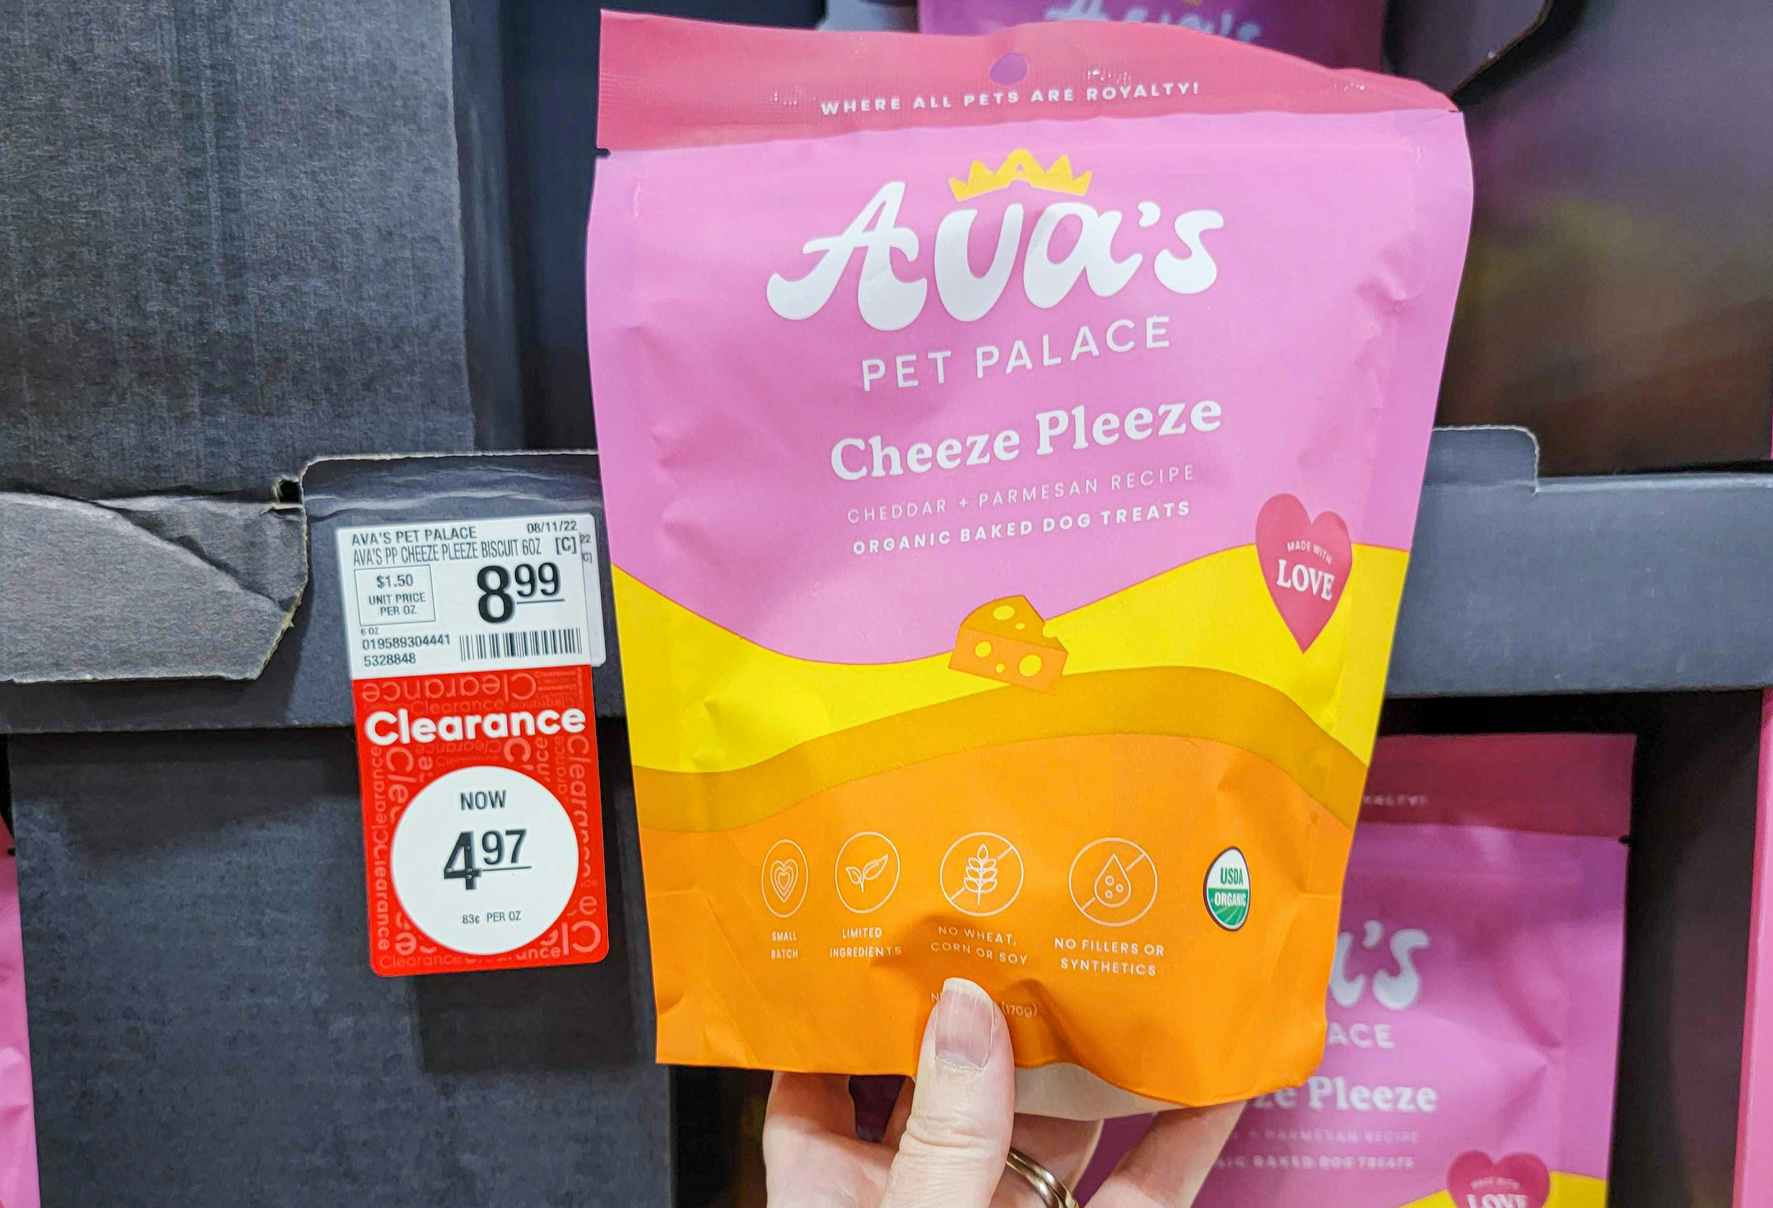 hand holding a bag of ava's pet palace organic dog treats in cheeze please flavor